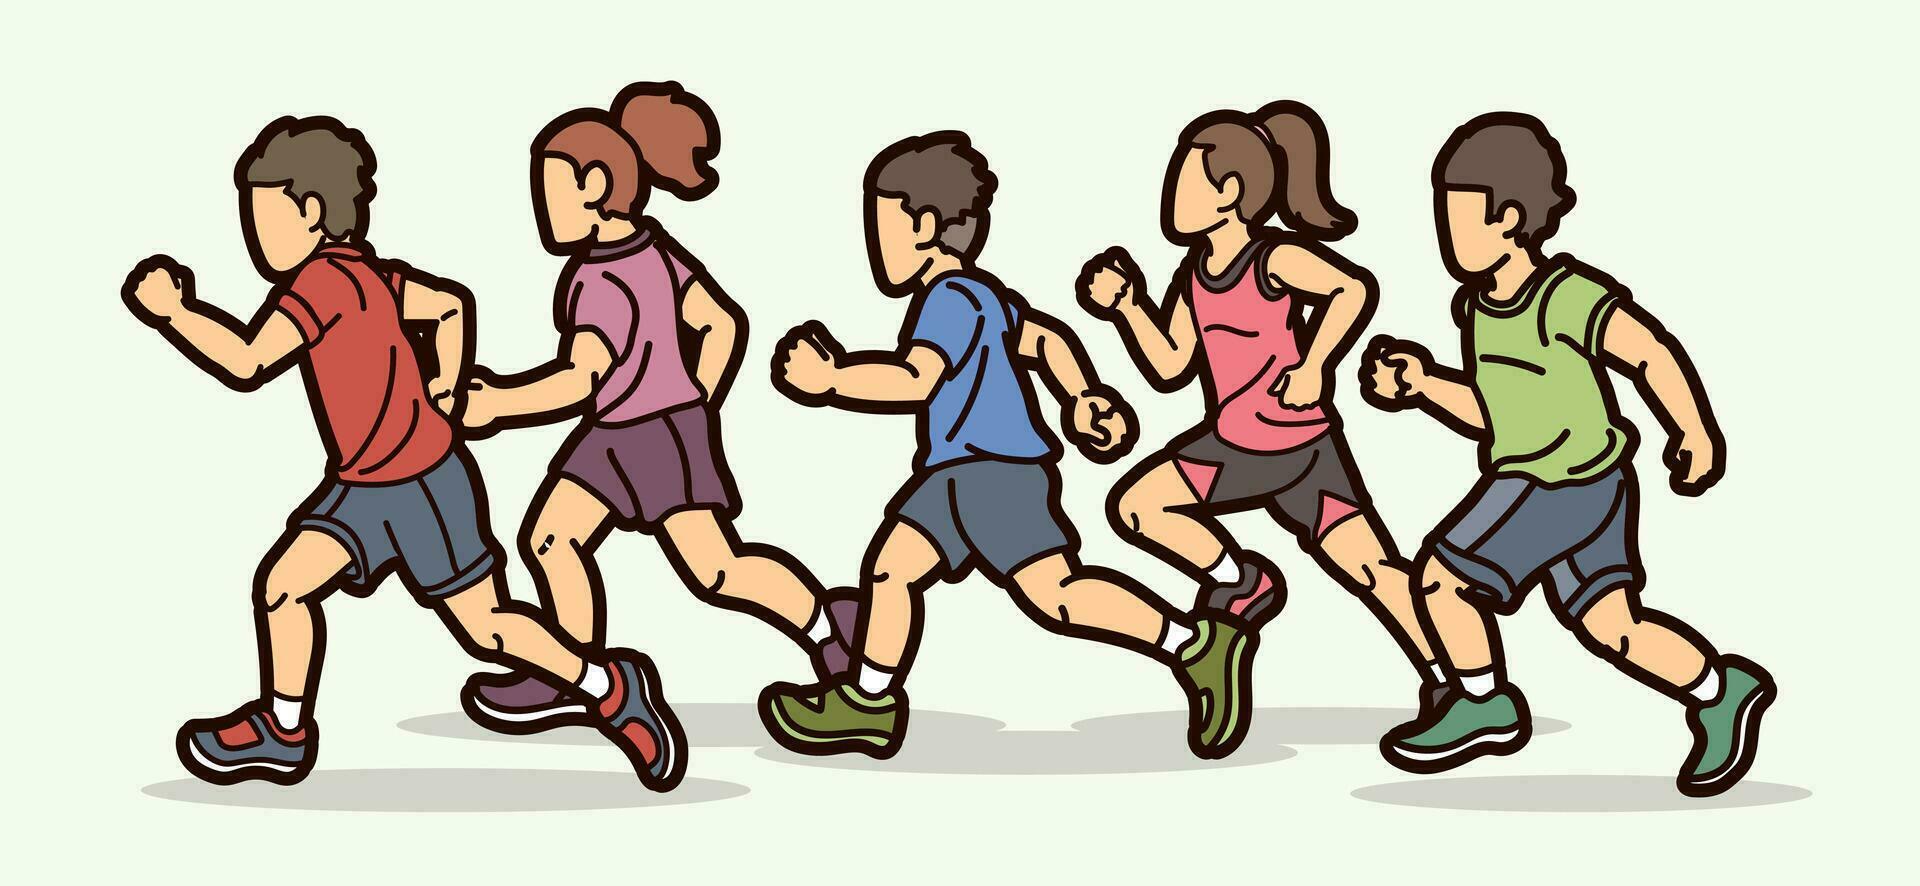 Children Running Boy and Girl Playing Together vector